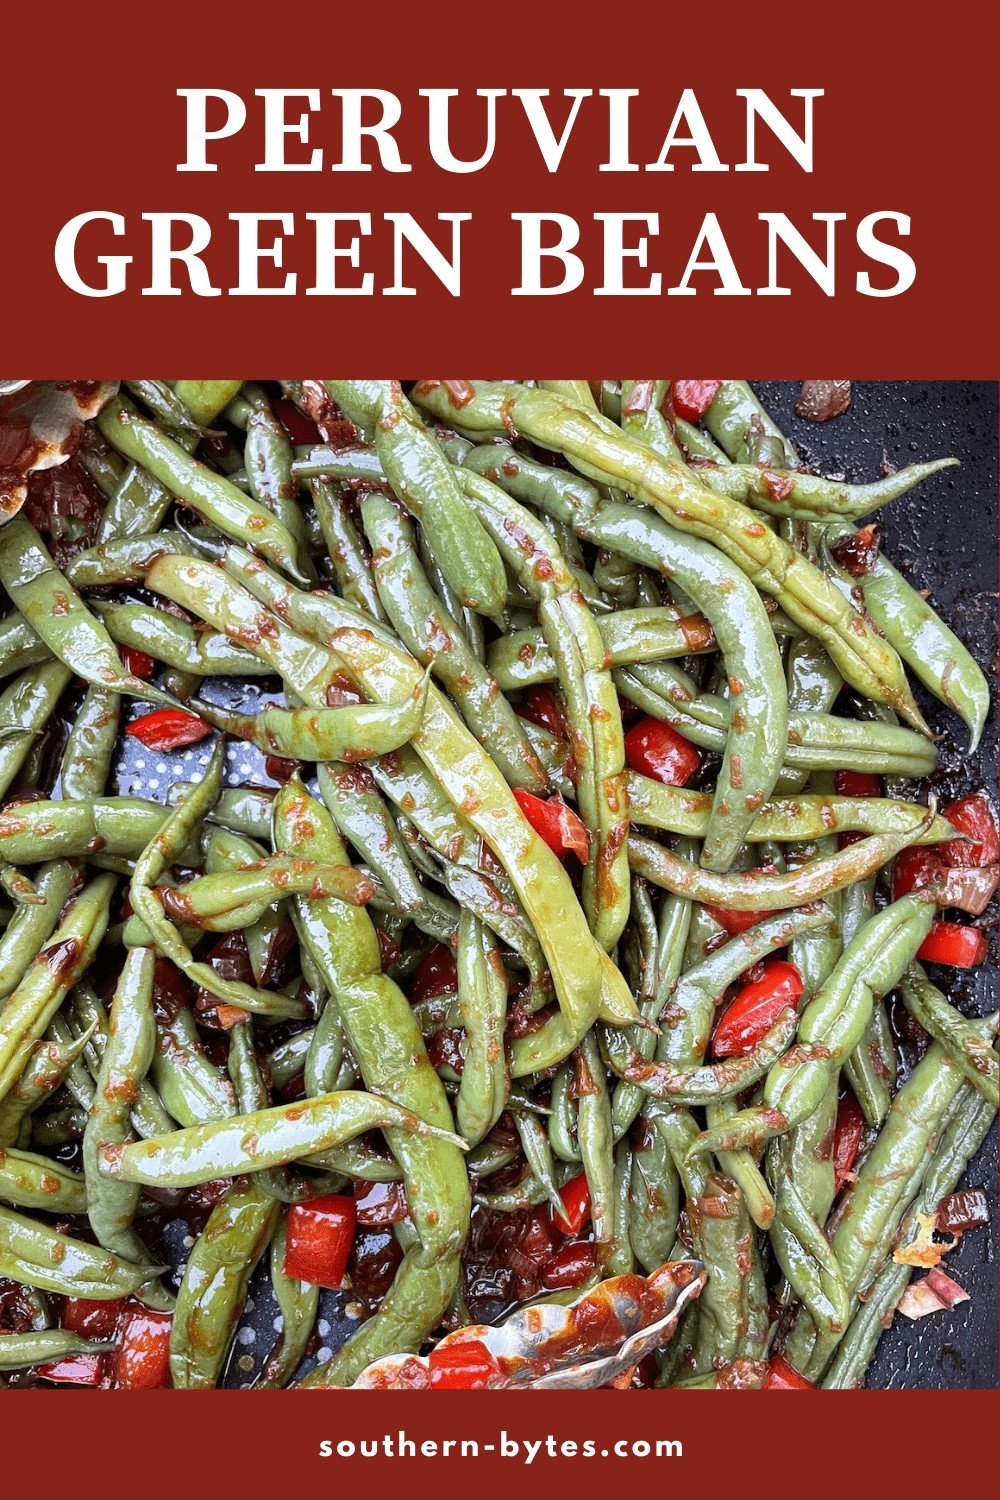 A pin image of a serving dish filled with ginger green beans and a pair of tongs.